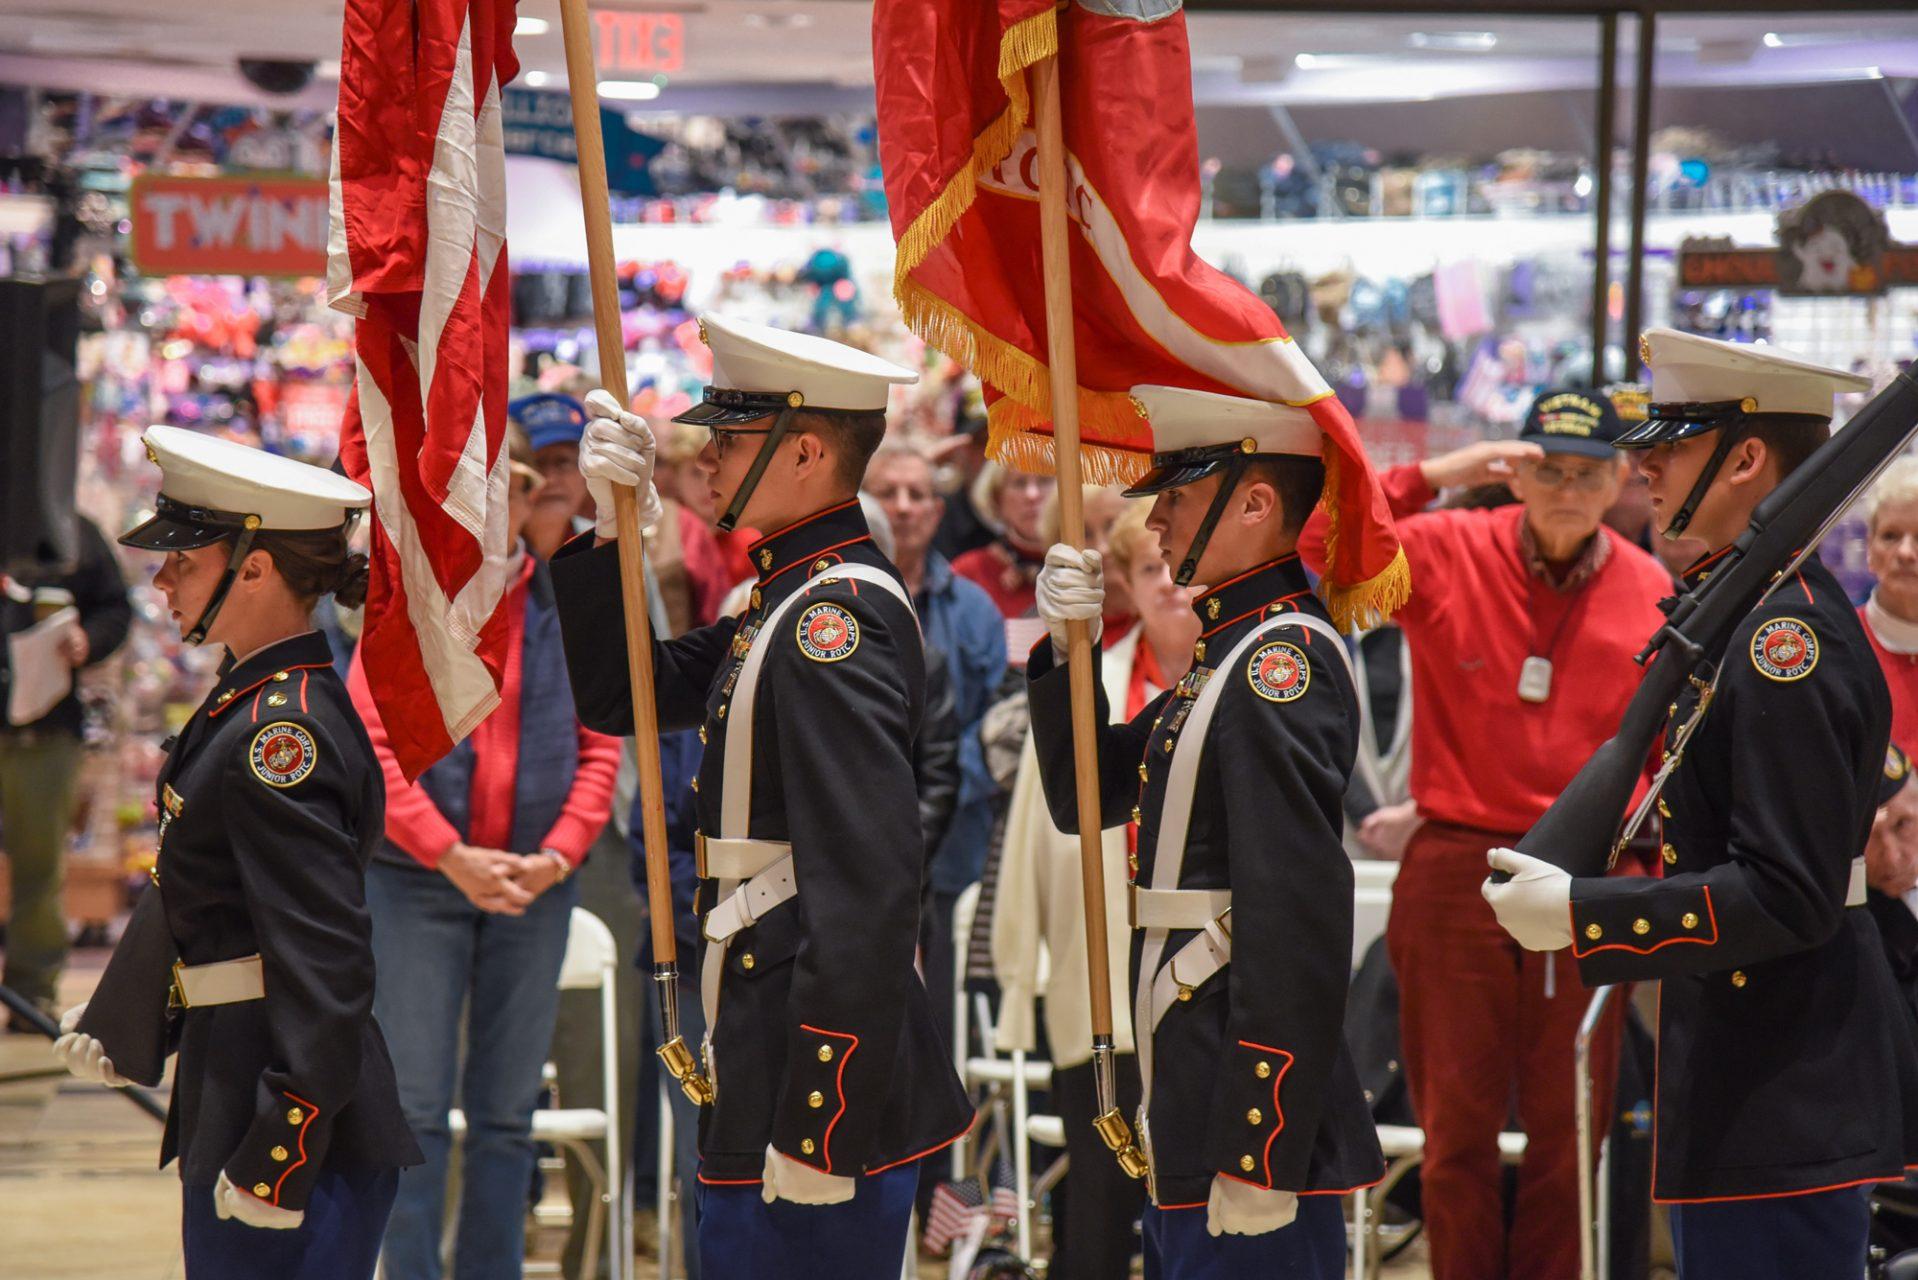 The Watauga High School MCJROTC performing the Retiring of Colors during The High Countrys Premiere Veterans Day Event. Many veterans and families of veterans gathered in the Boone Mall this past Saturday to honor those who have served our country.